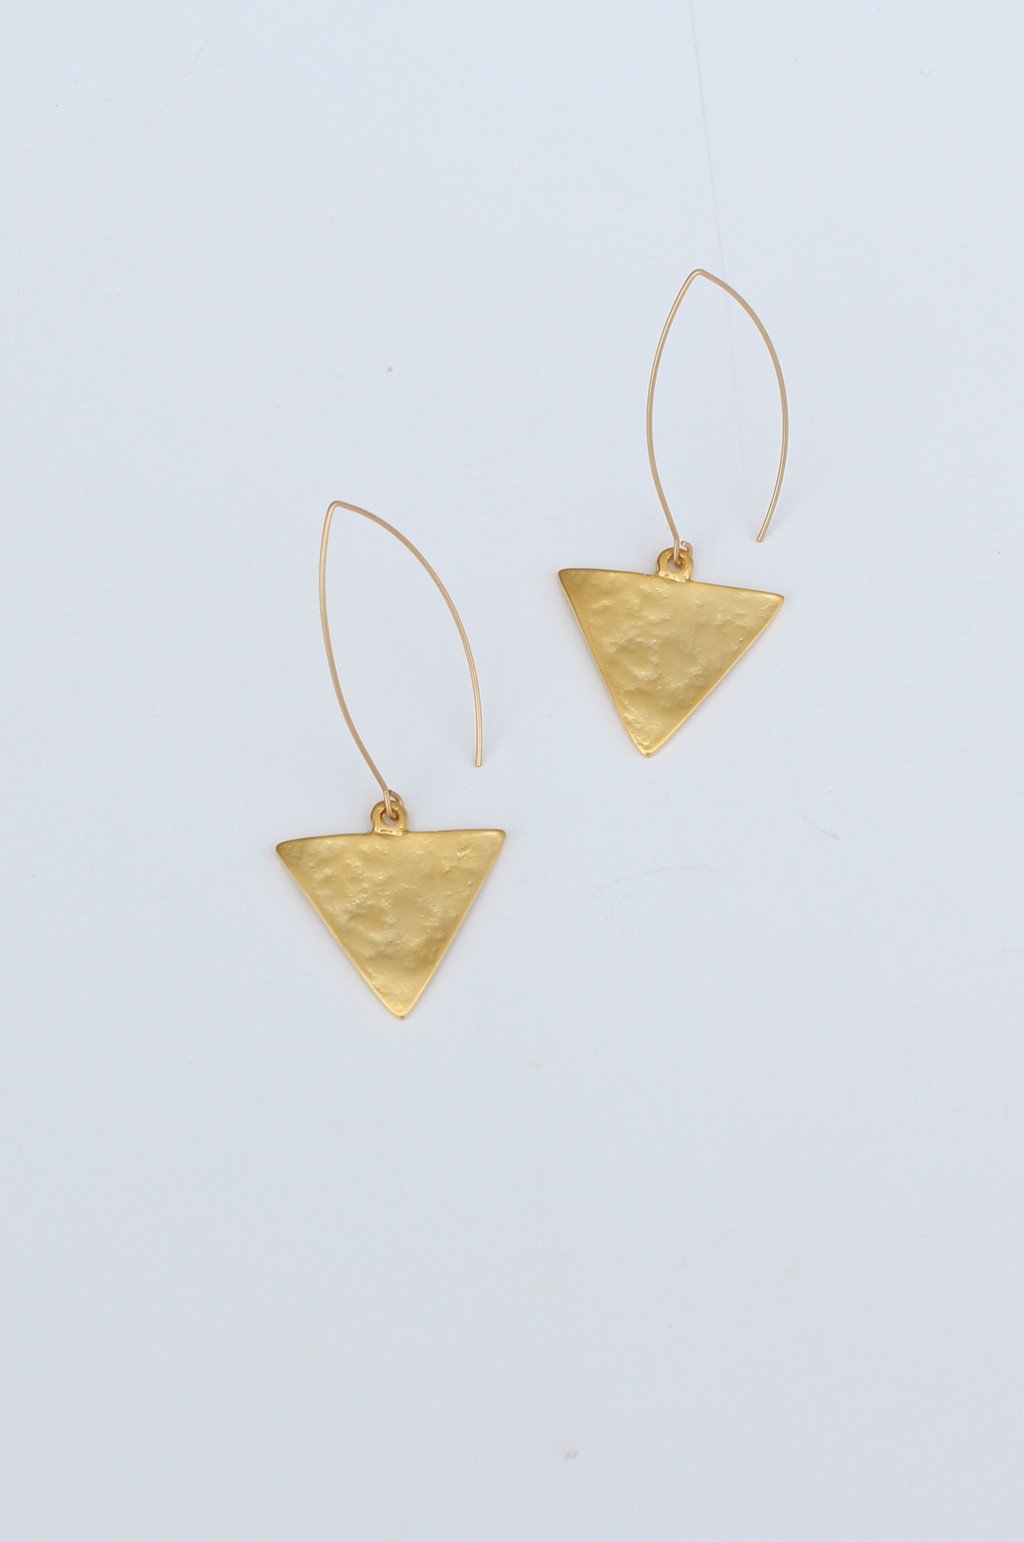 Tabby Earrings by Annie Claire Designs - SoSis